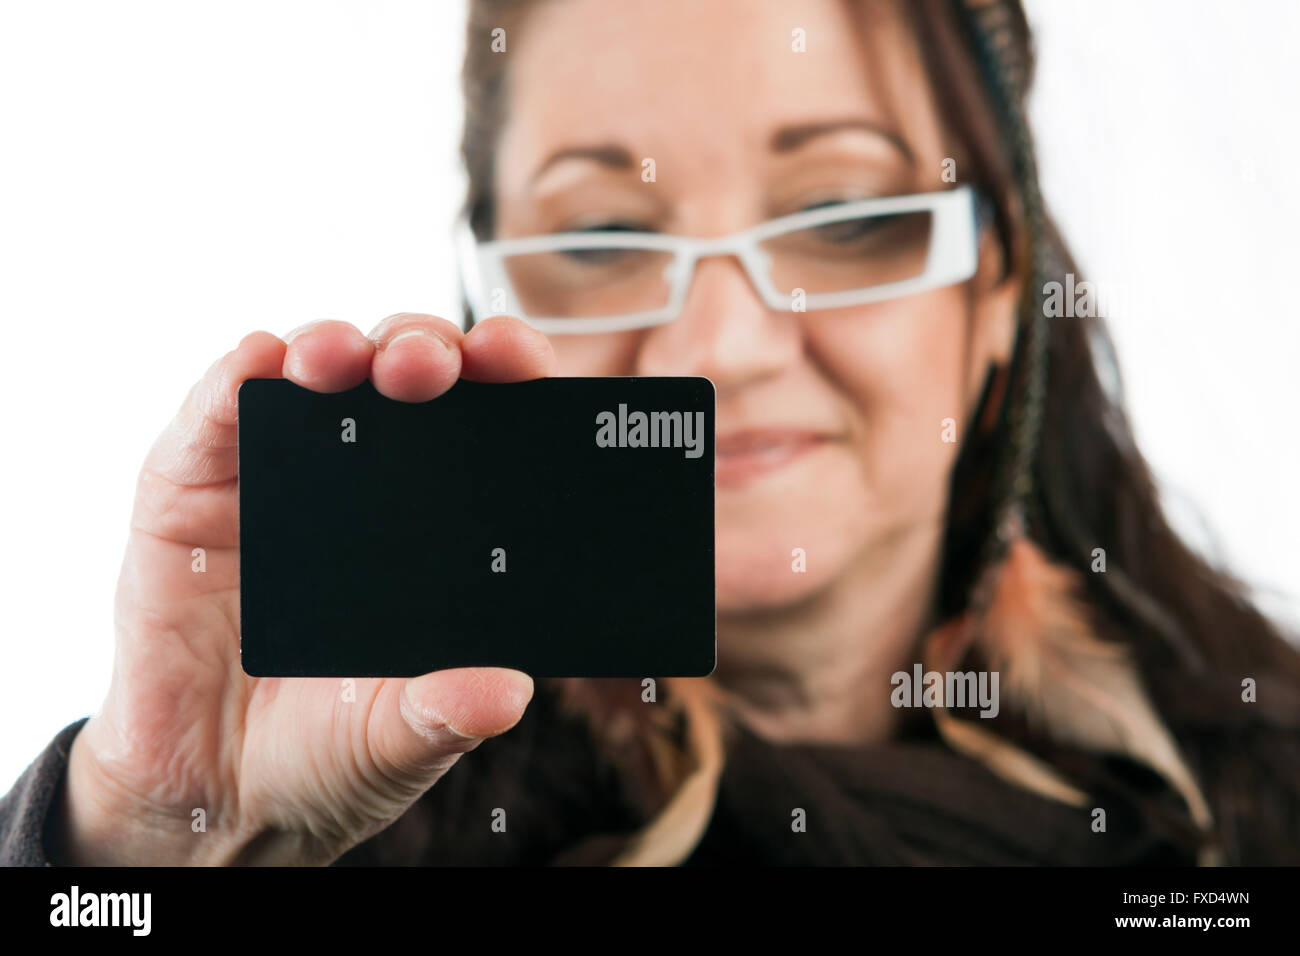 Woman Showing Blank Credit Card Stock Photo